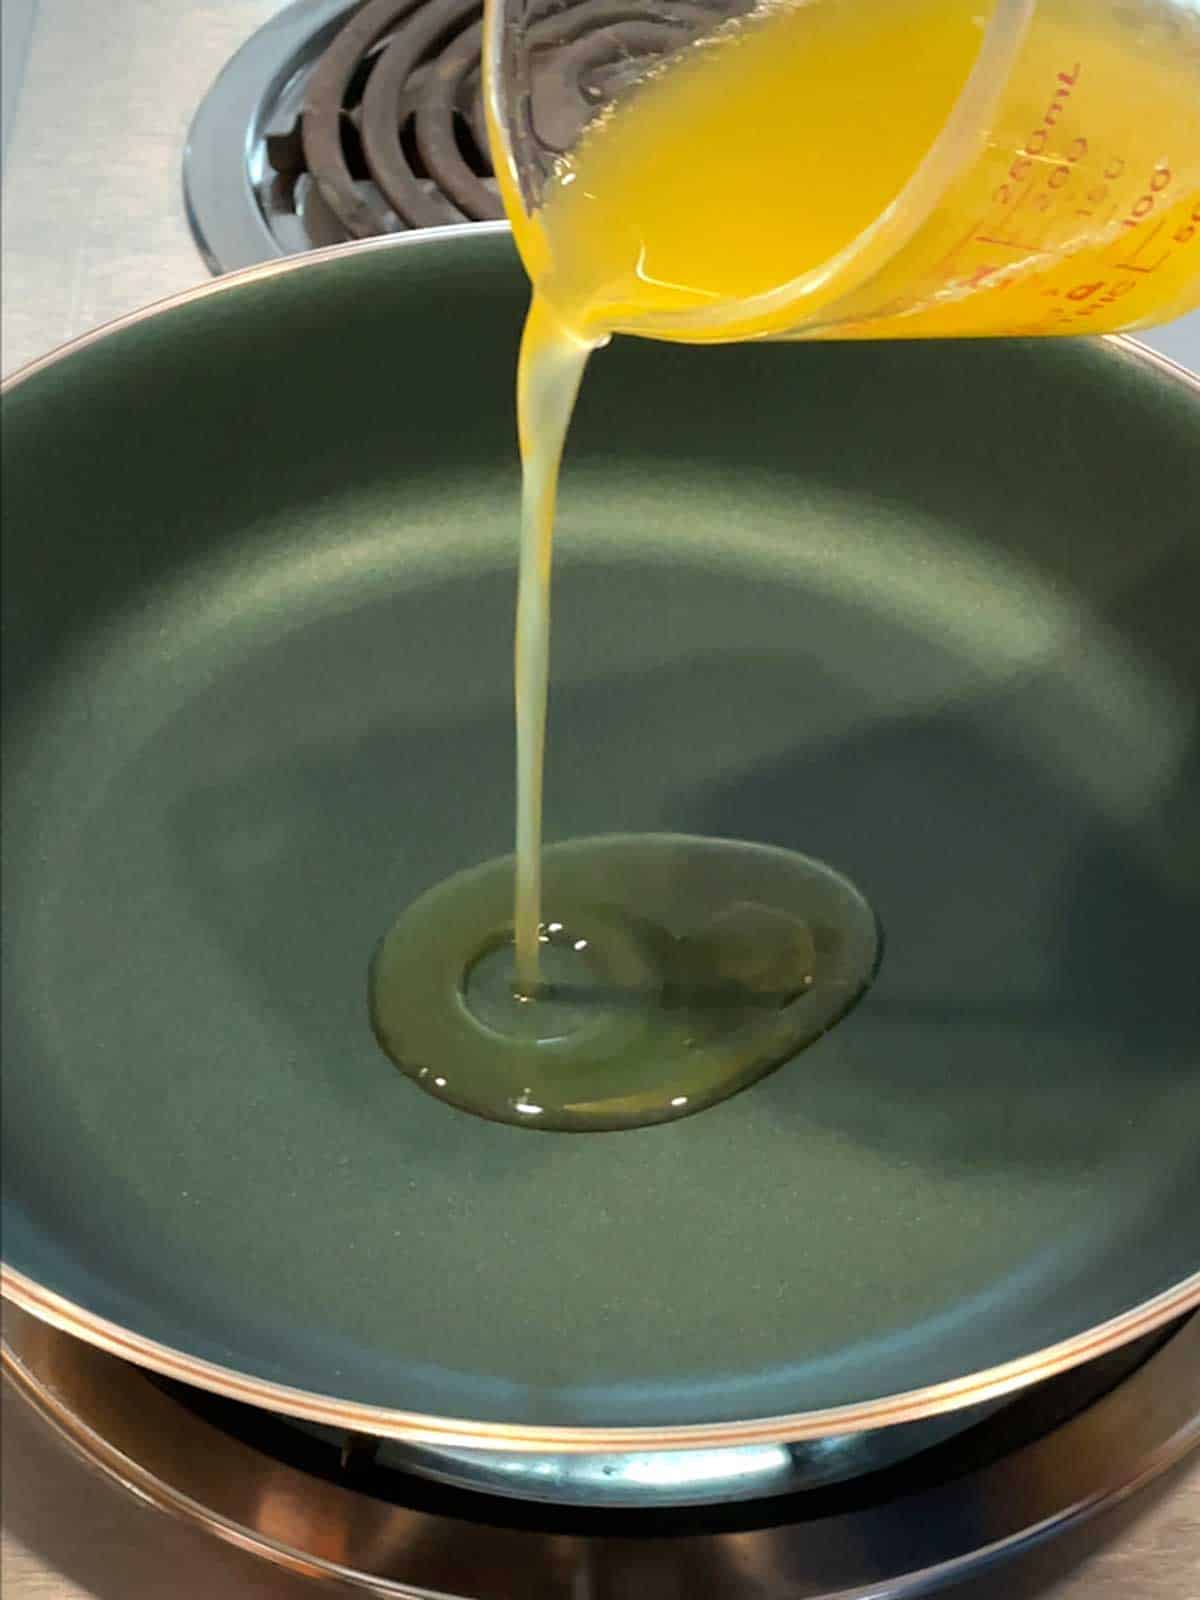 Adding clarified butter to skillet.